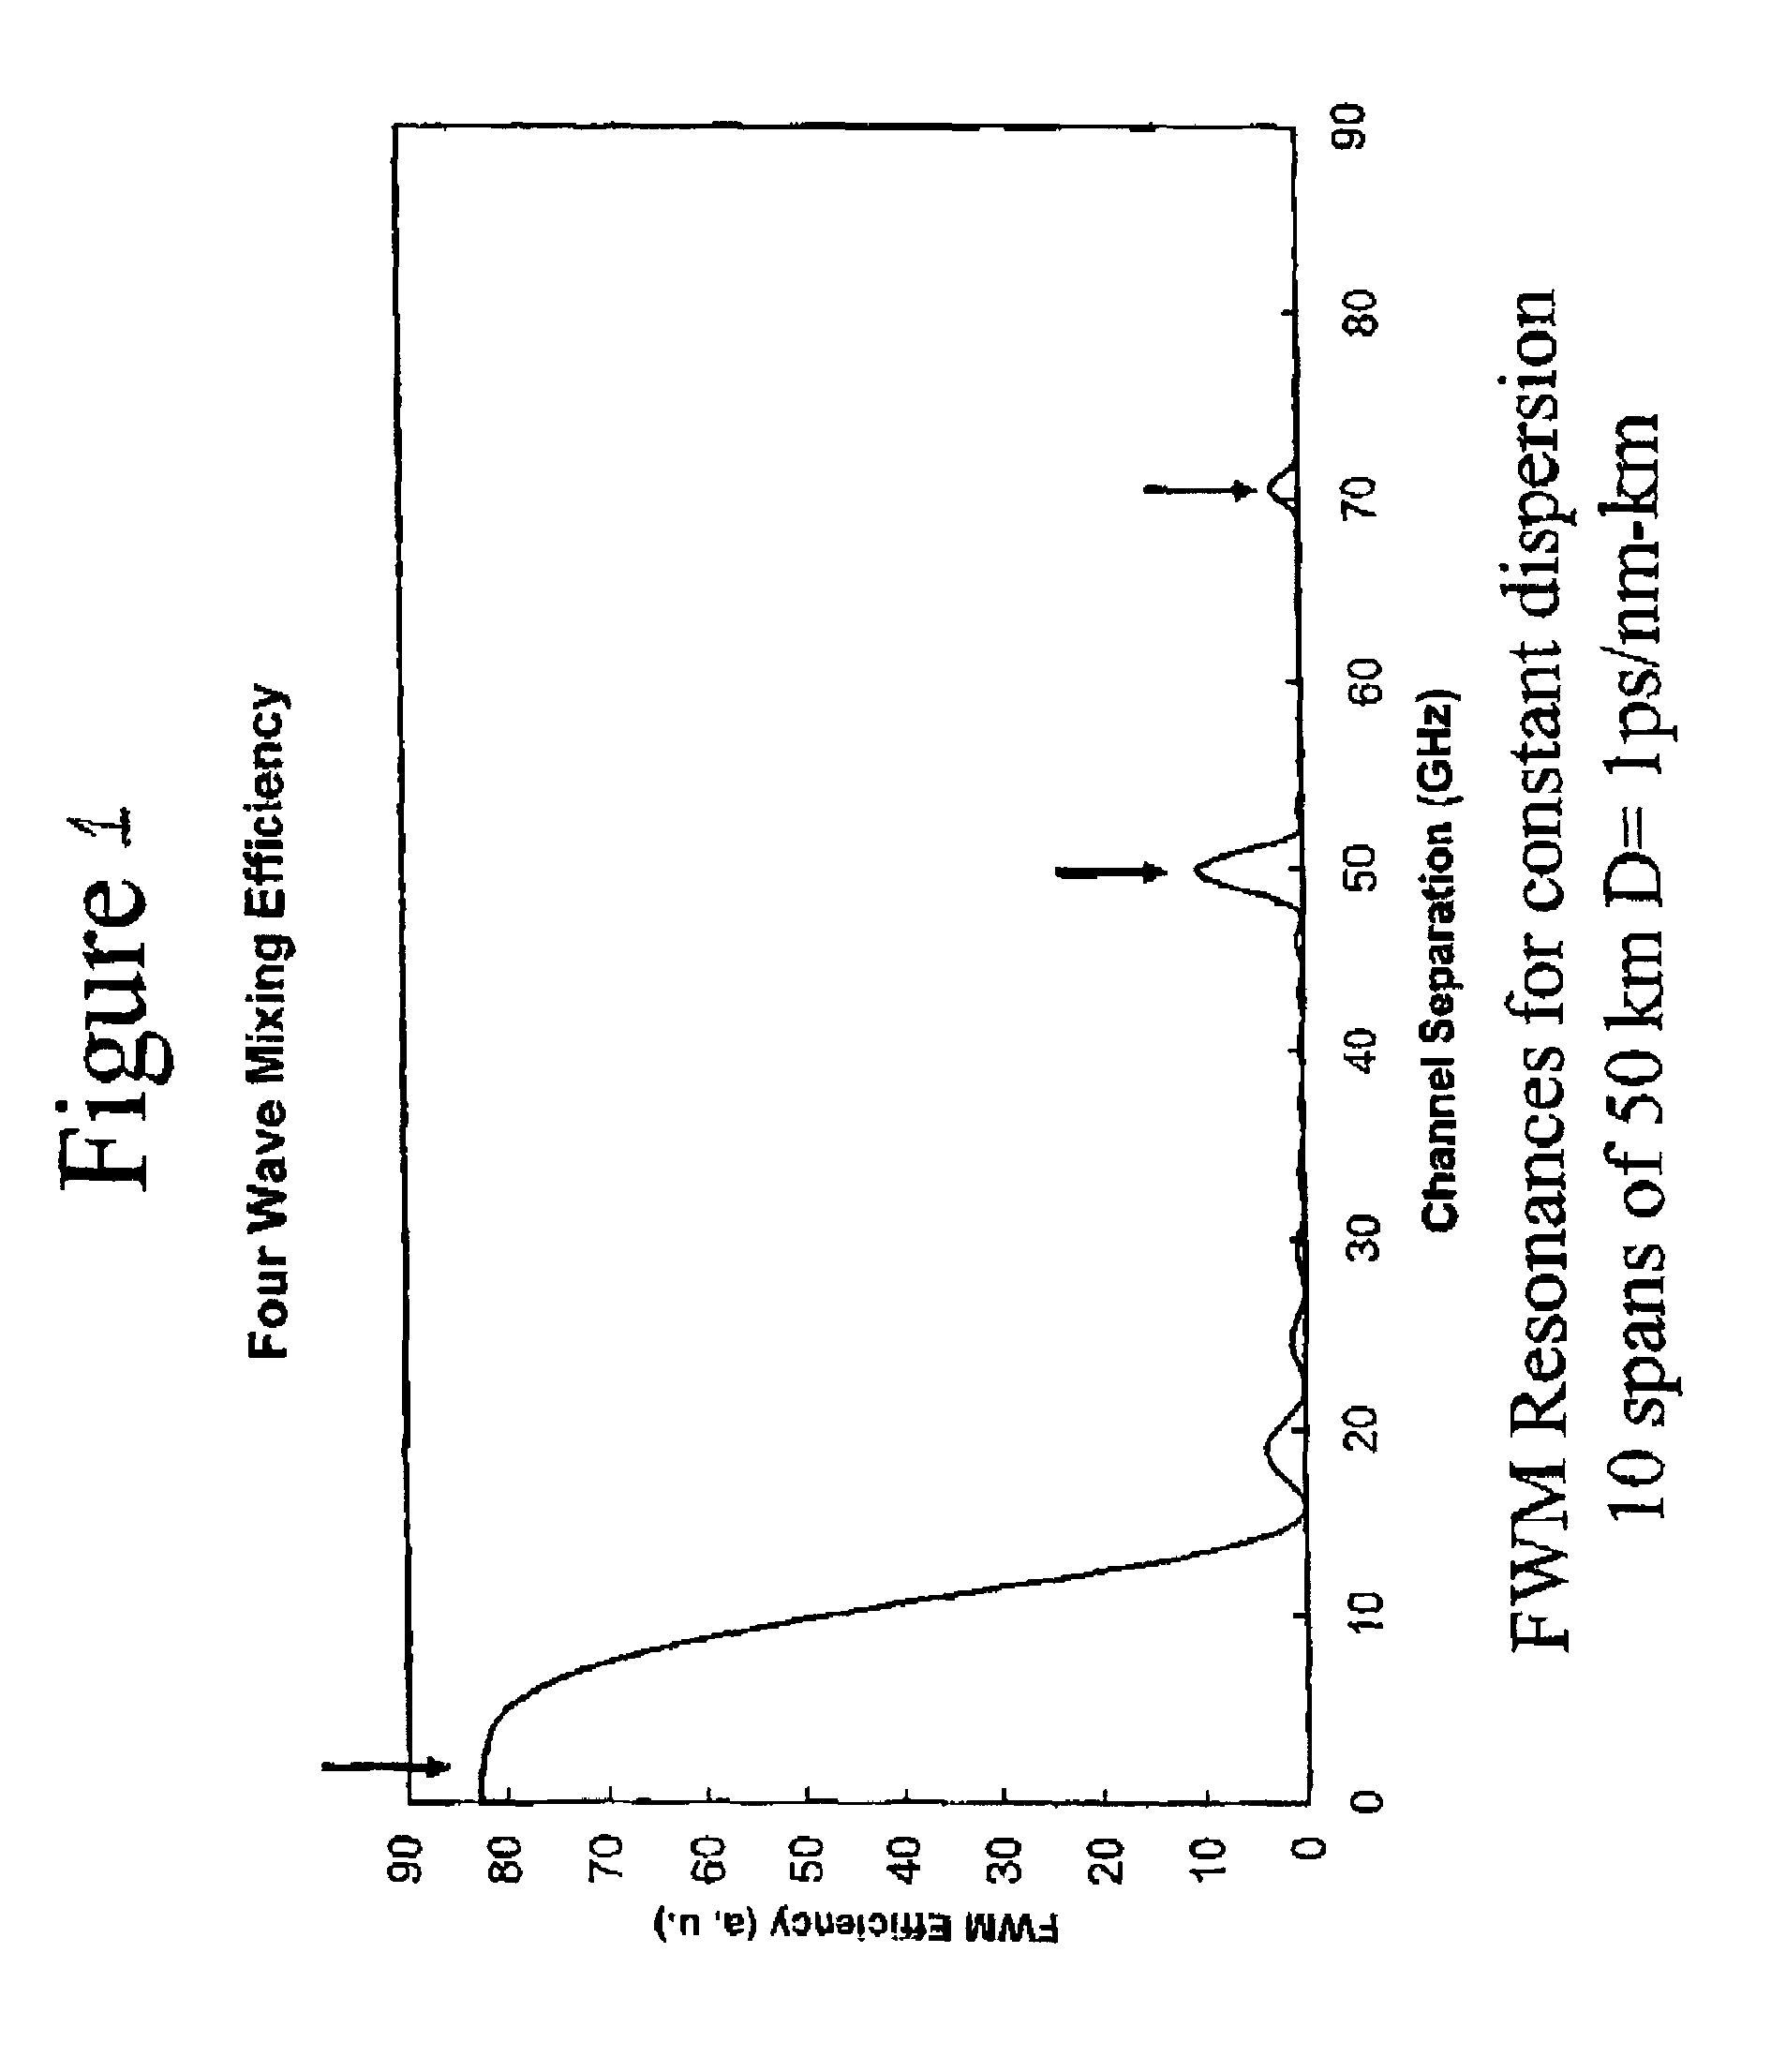 Optical communication system having an antiresonant dispersion map suppressing four wave mixing and cross phase modulation